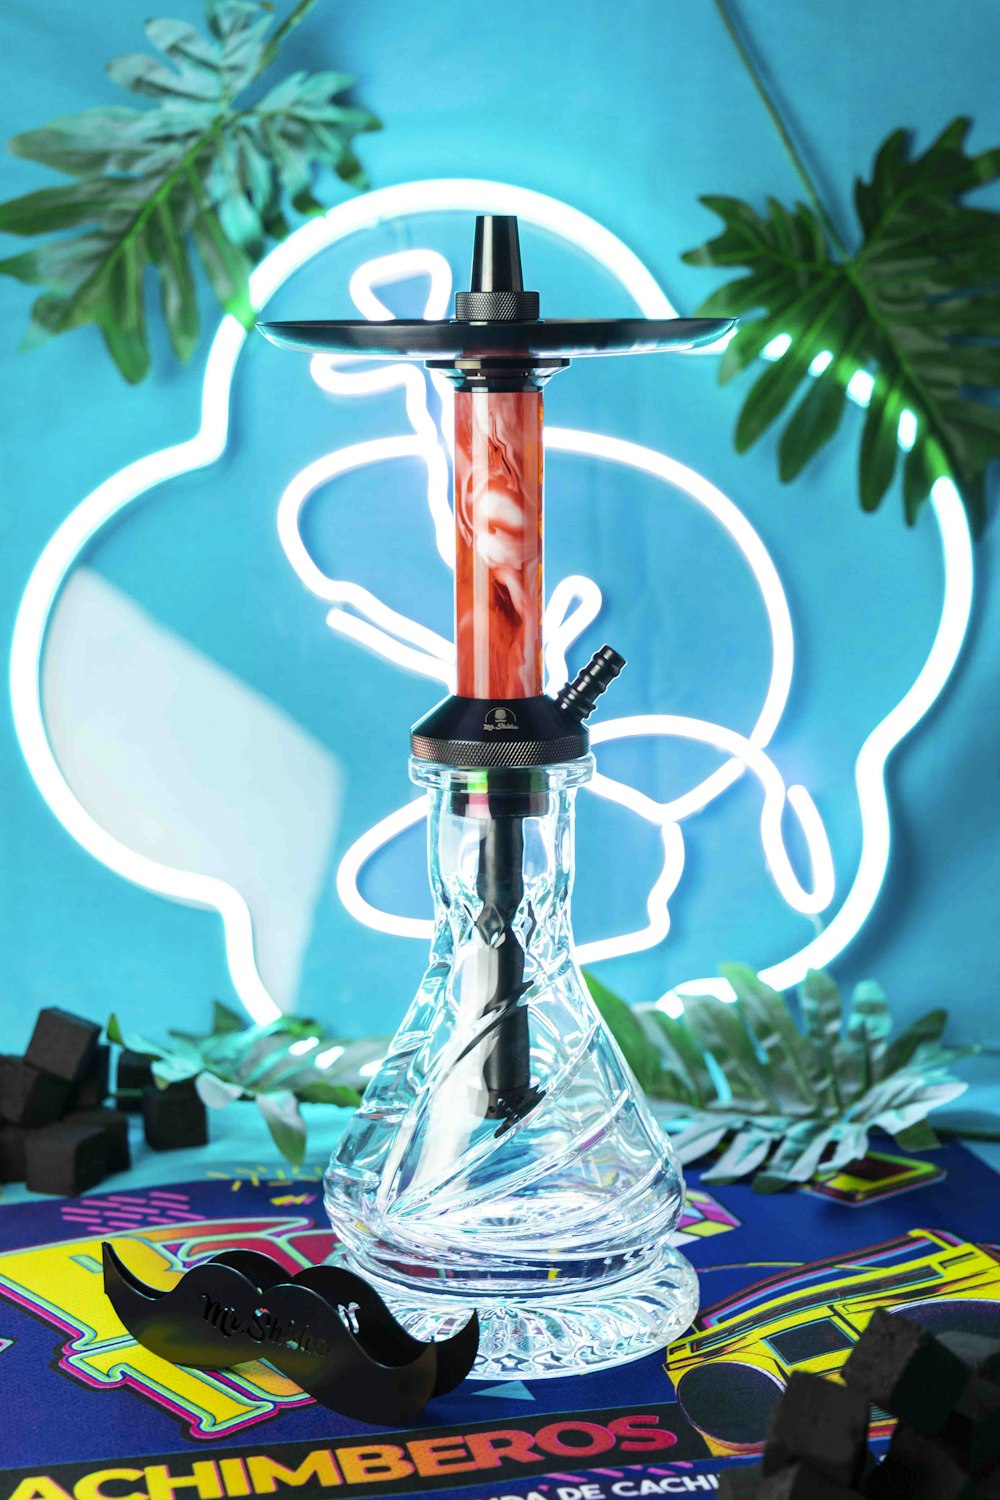 a glass hookah with a red liquid in it